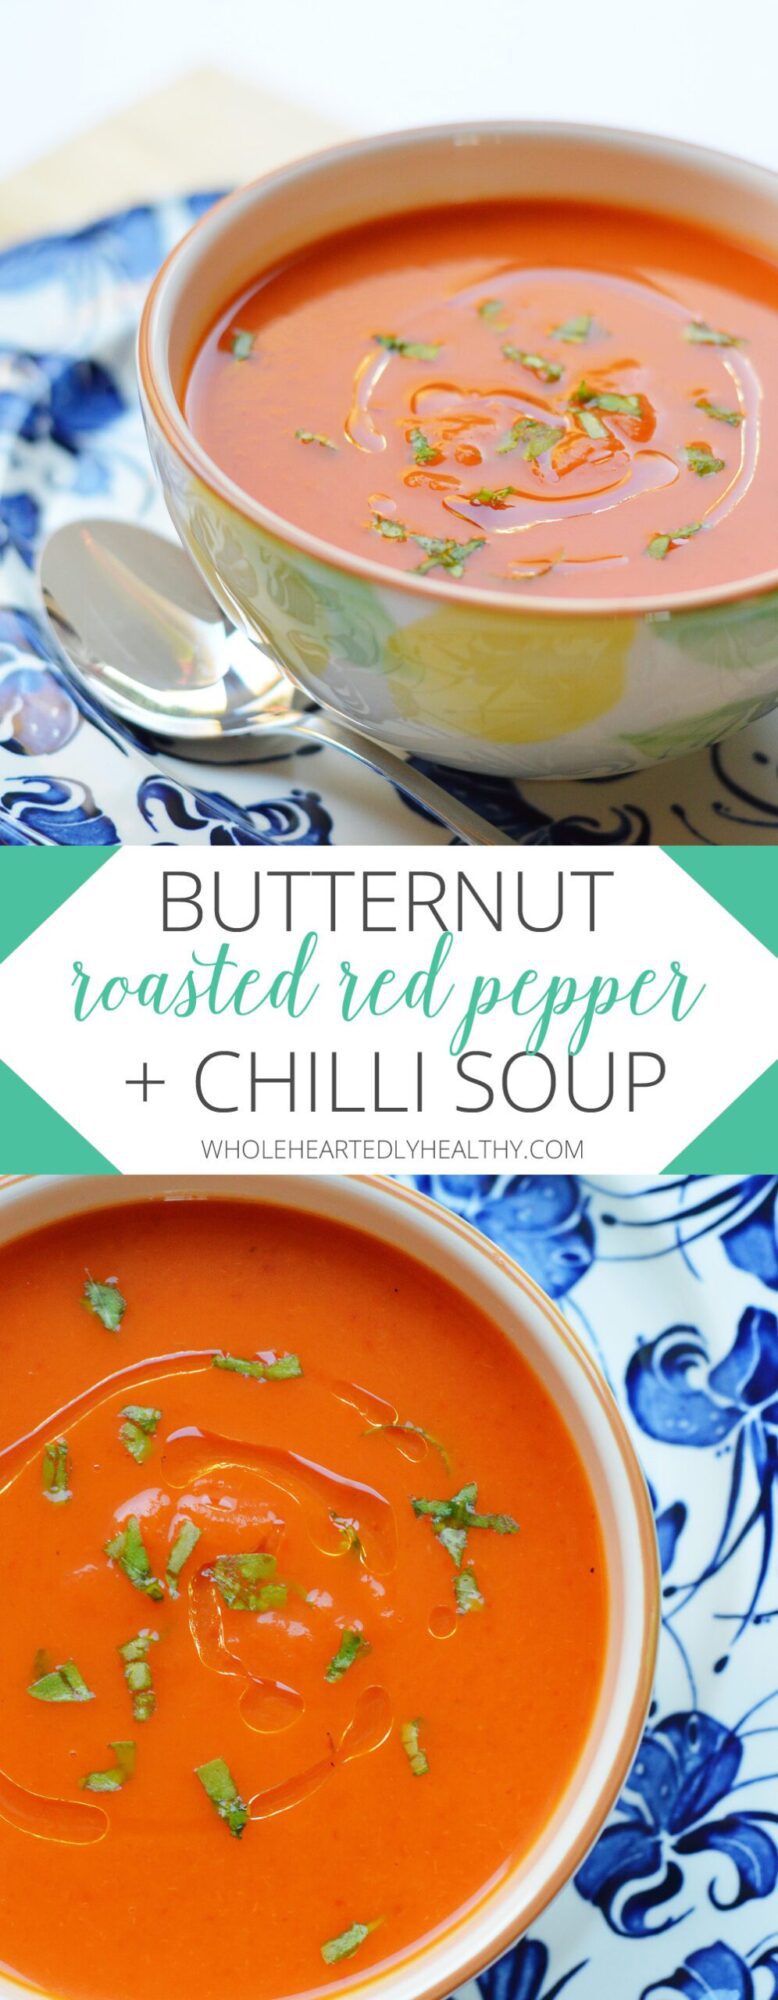 Butternut roasted red pepper and chilli soup